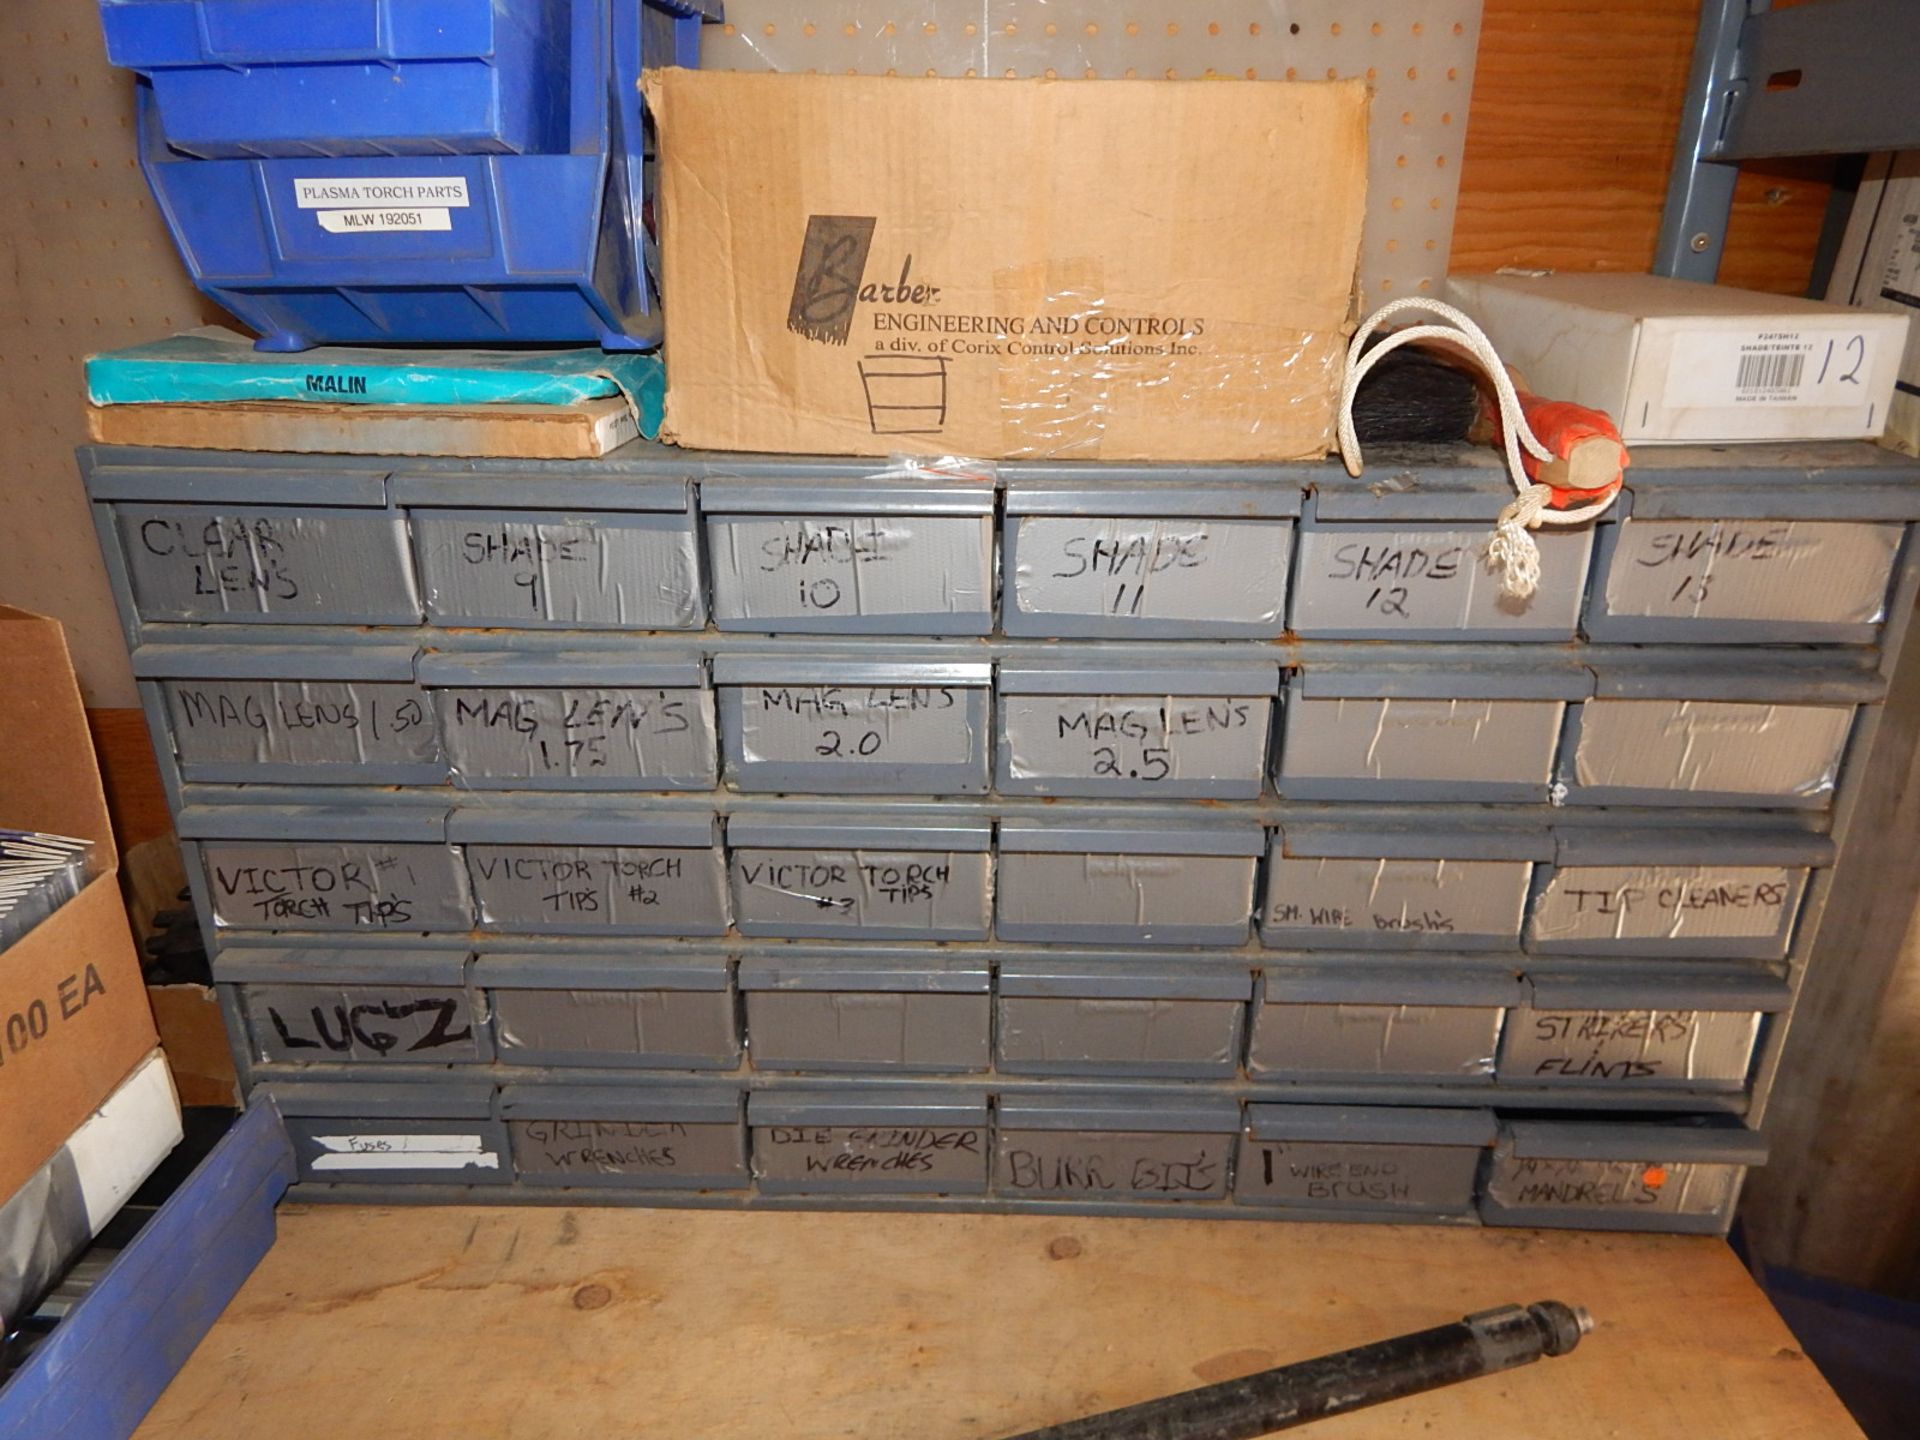 LOT/ SECTION OF SHELF CONSISTING OF WELDING ELECTRODES, LENSES, AND PAINT MARKERS (SC 102) - Image 2 of 2